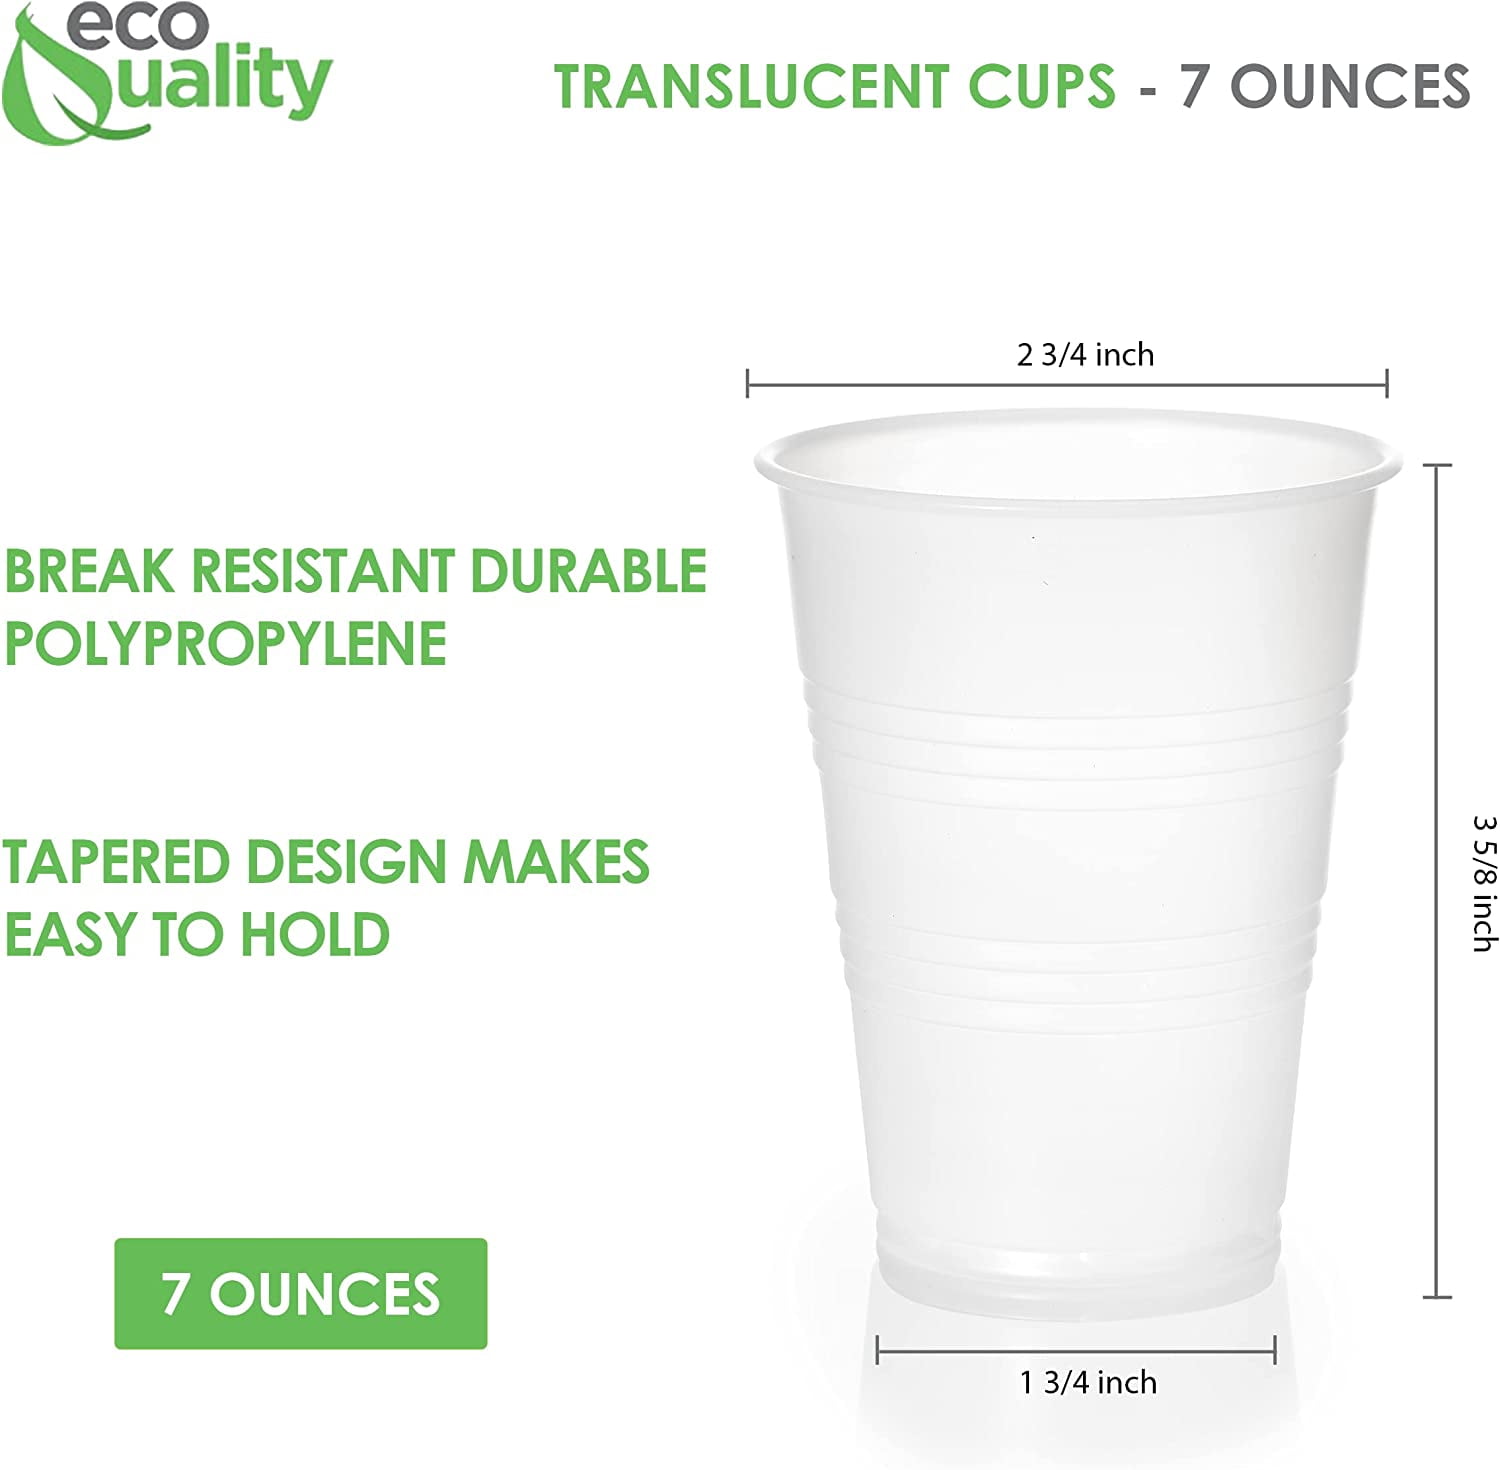 7oz plastic cups CLEAR Qty options - Starlight Packaging